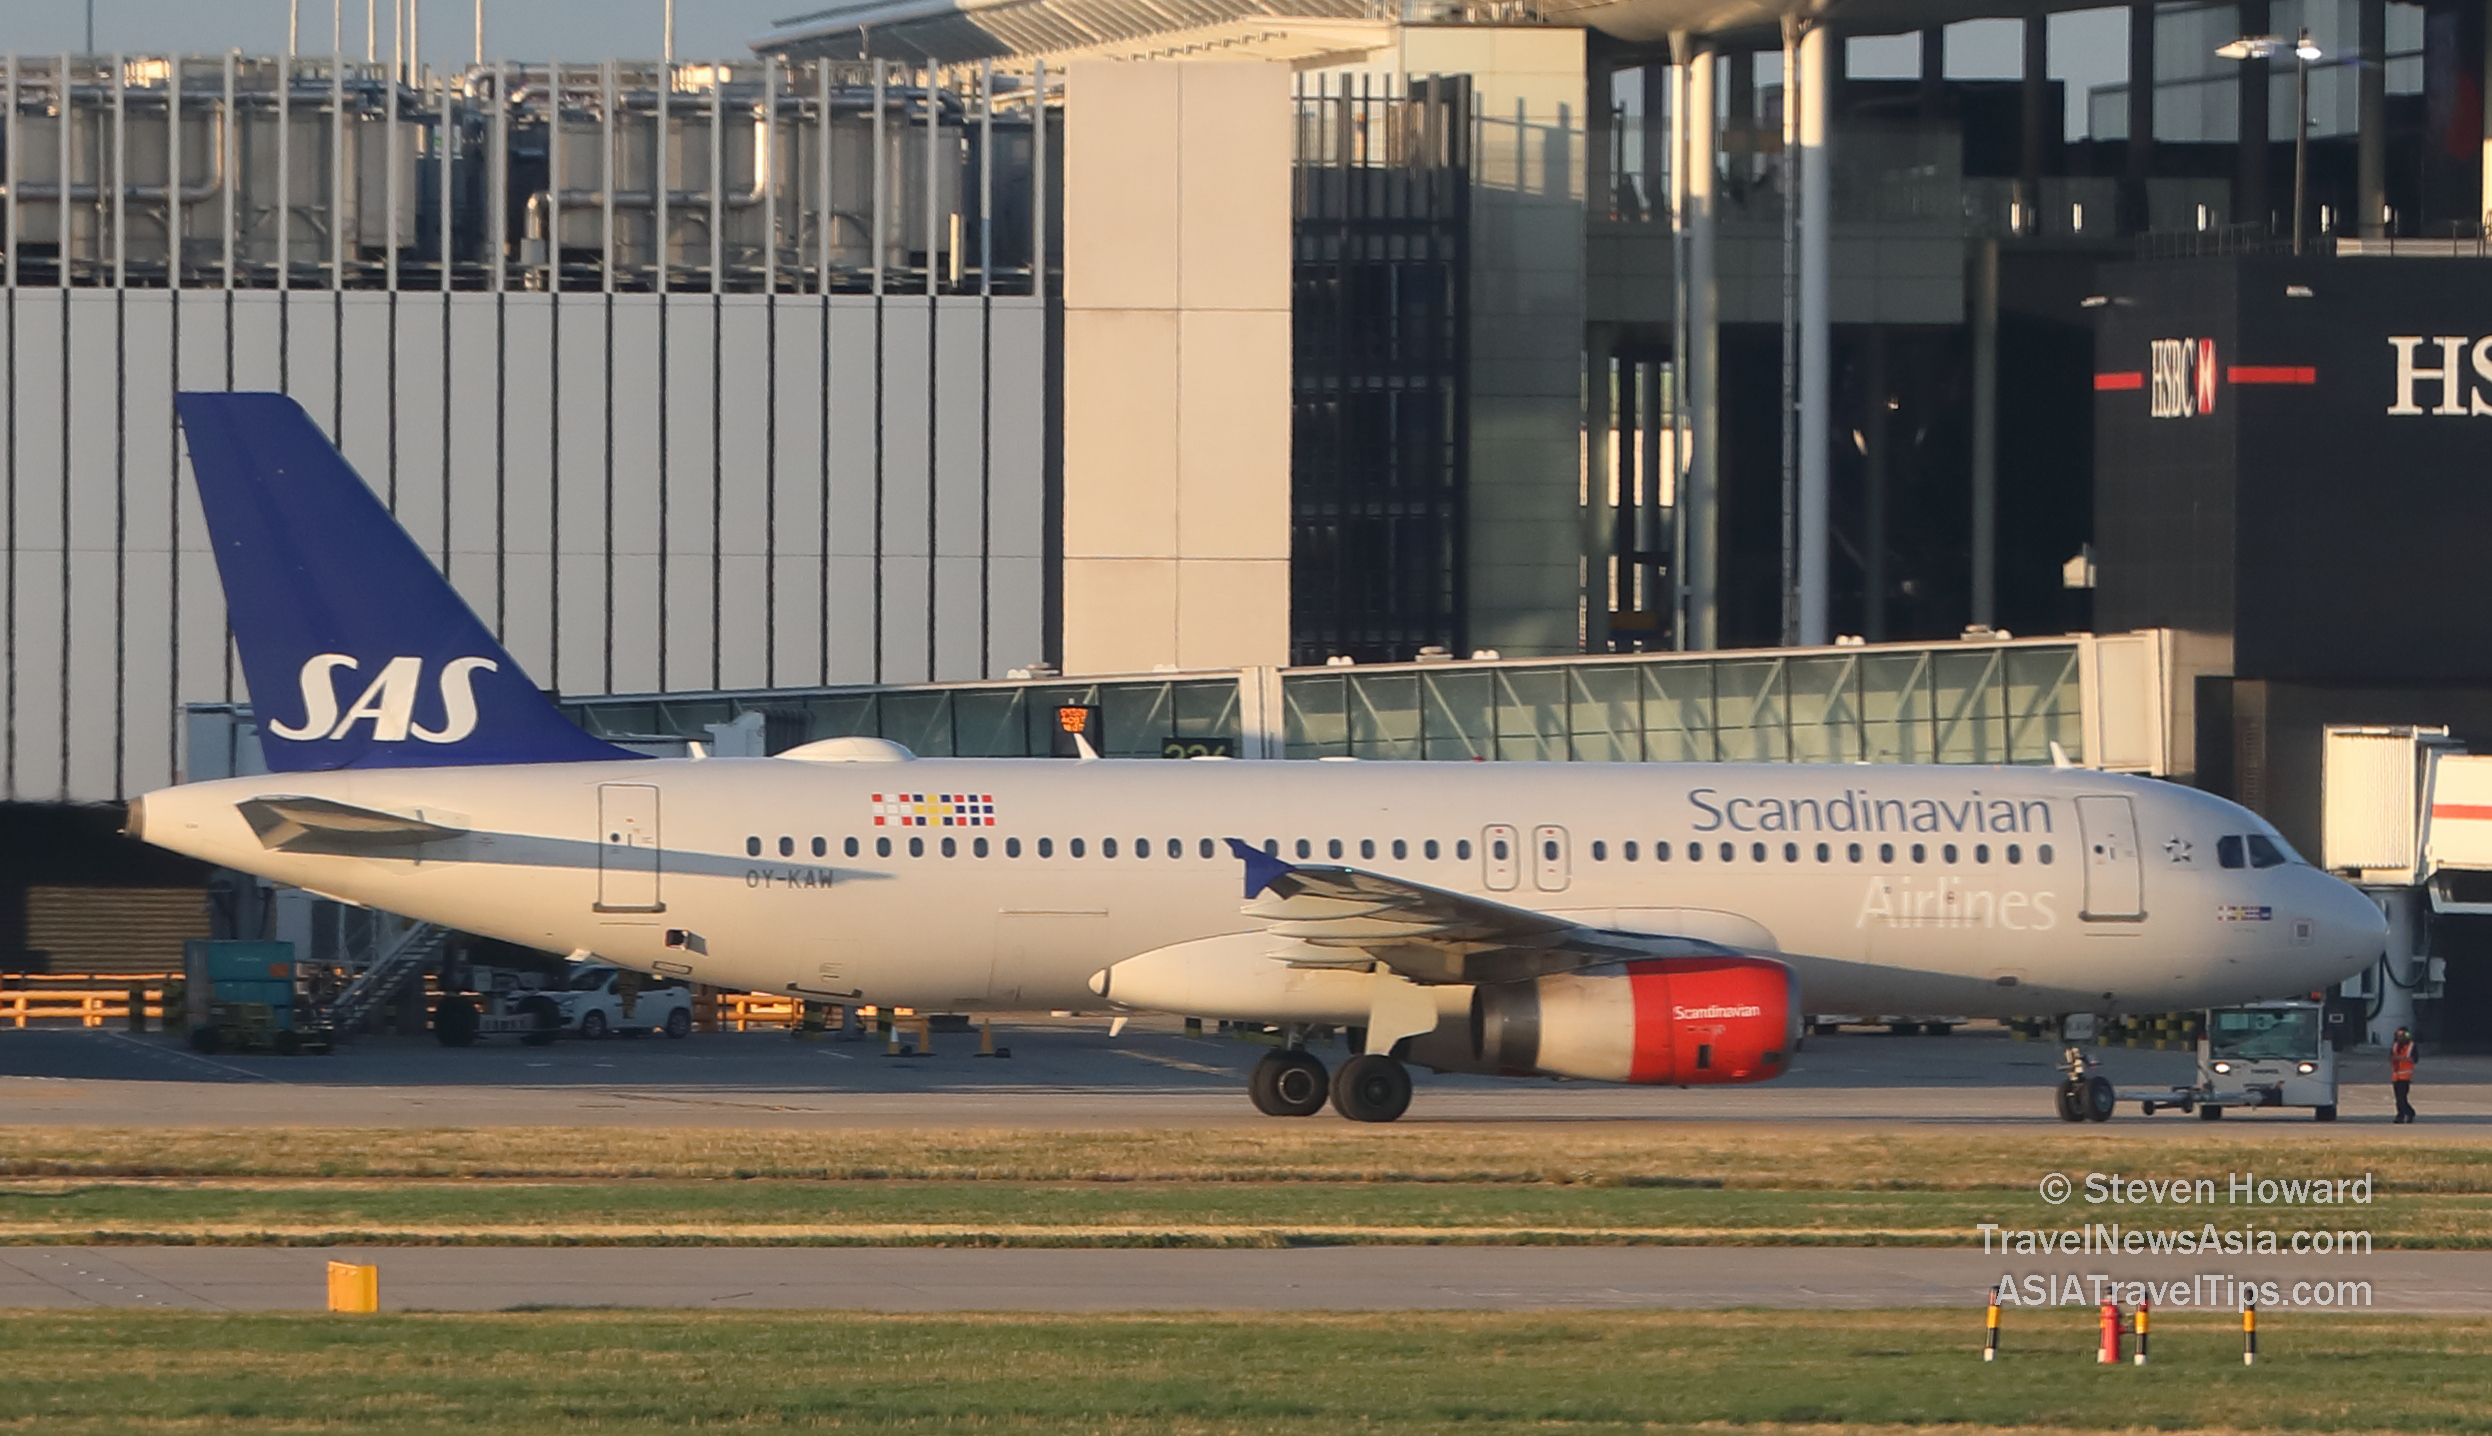 SAS Airbus A320 reg: OYKAW at London Heathrow in 2018. Picture by Steven Howard of TravelNewsAsia.com Click to enlarge.